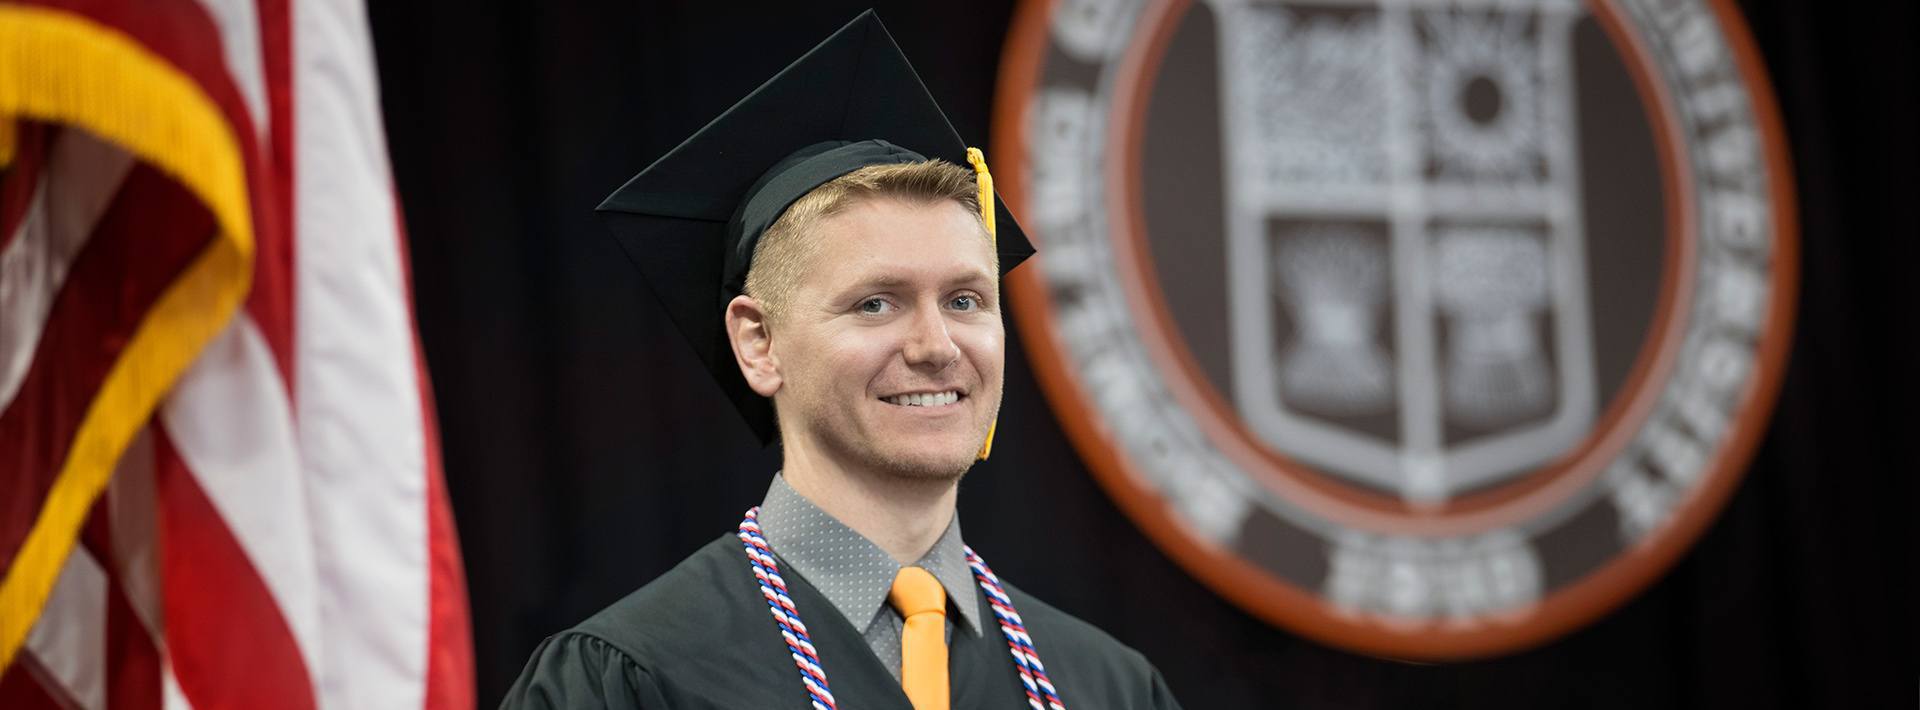 A native of Boise, Idaho, Aspen was drawn to BGSU because of the University's strong commitment to Military and Veteran services. Aspen said the Air University (AU-ABC) program was a major factor that contributed to his interest in BGSU.